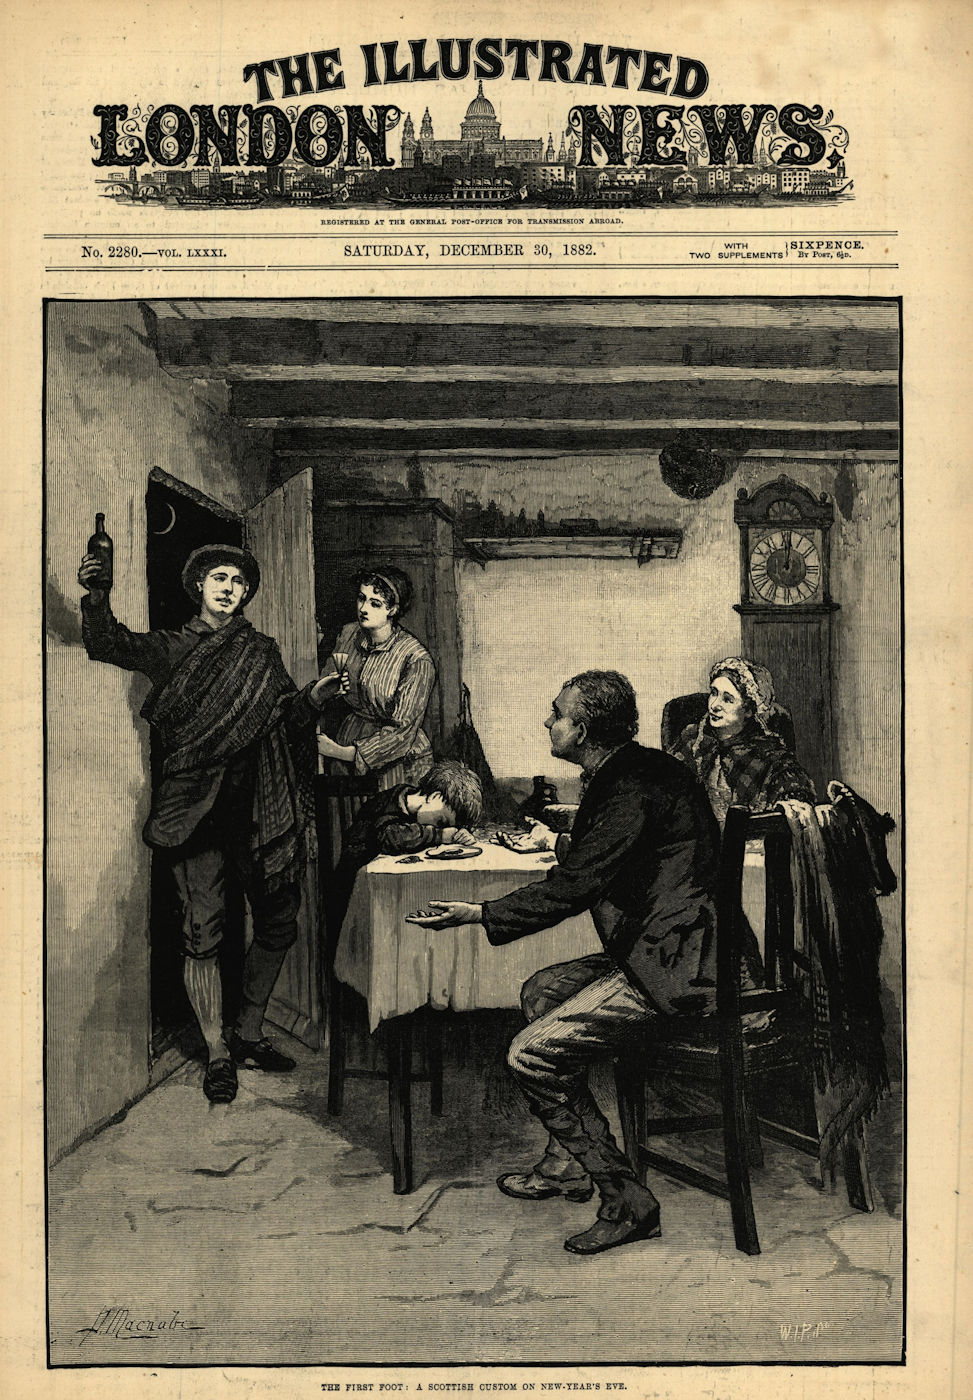 The first foot: A Scottish custom on New-Year's Eve. Society. Scotland 1882